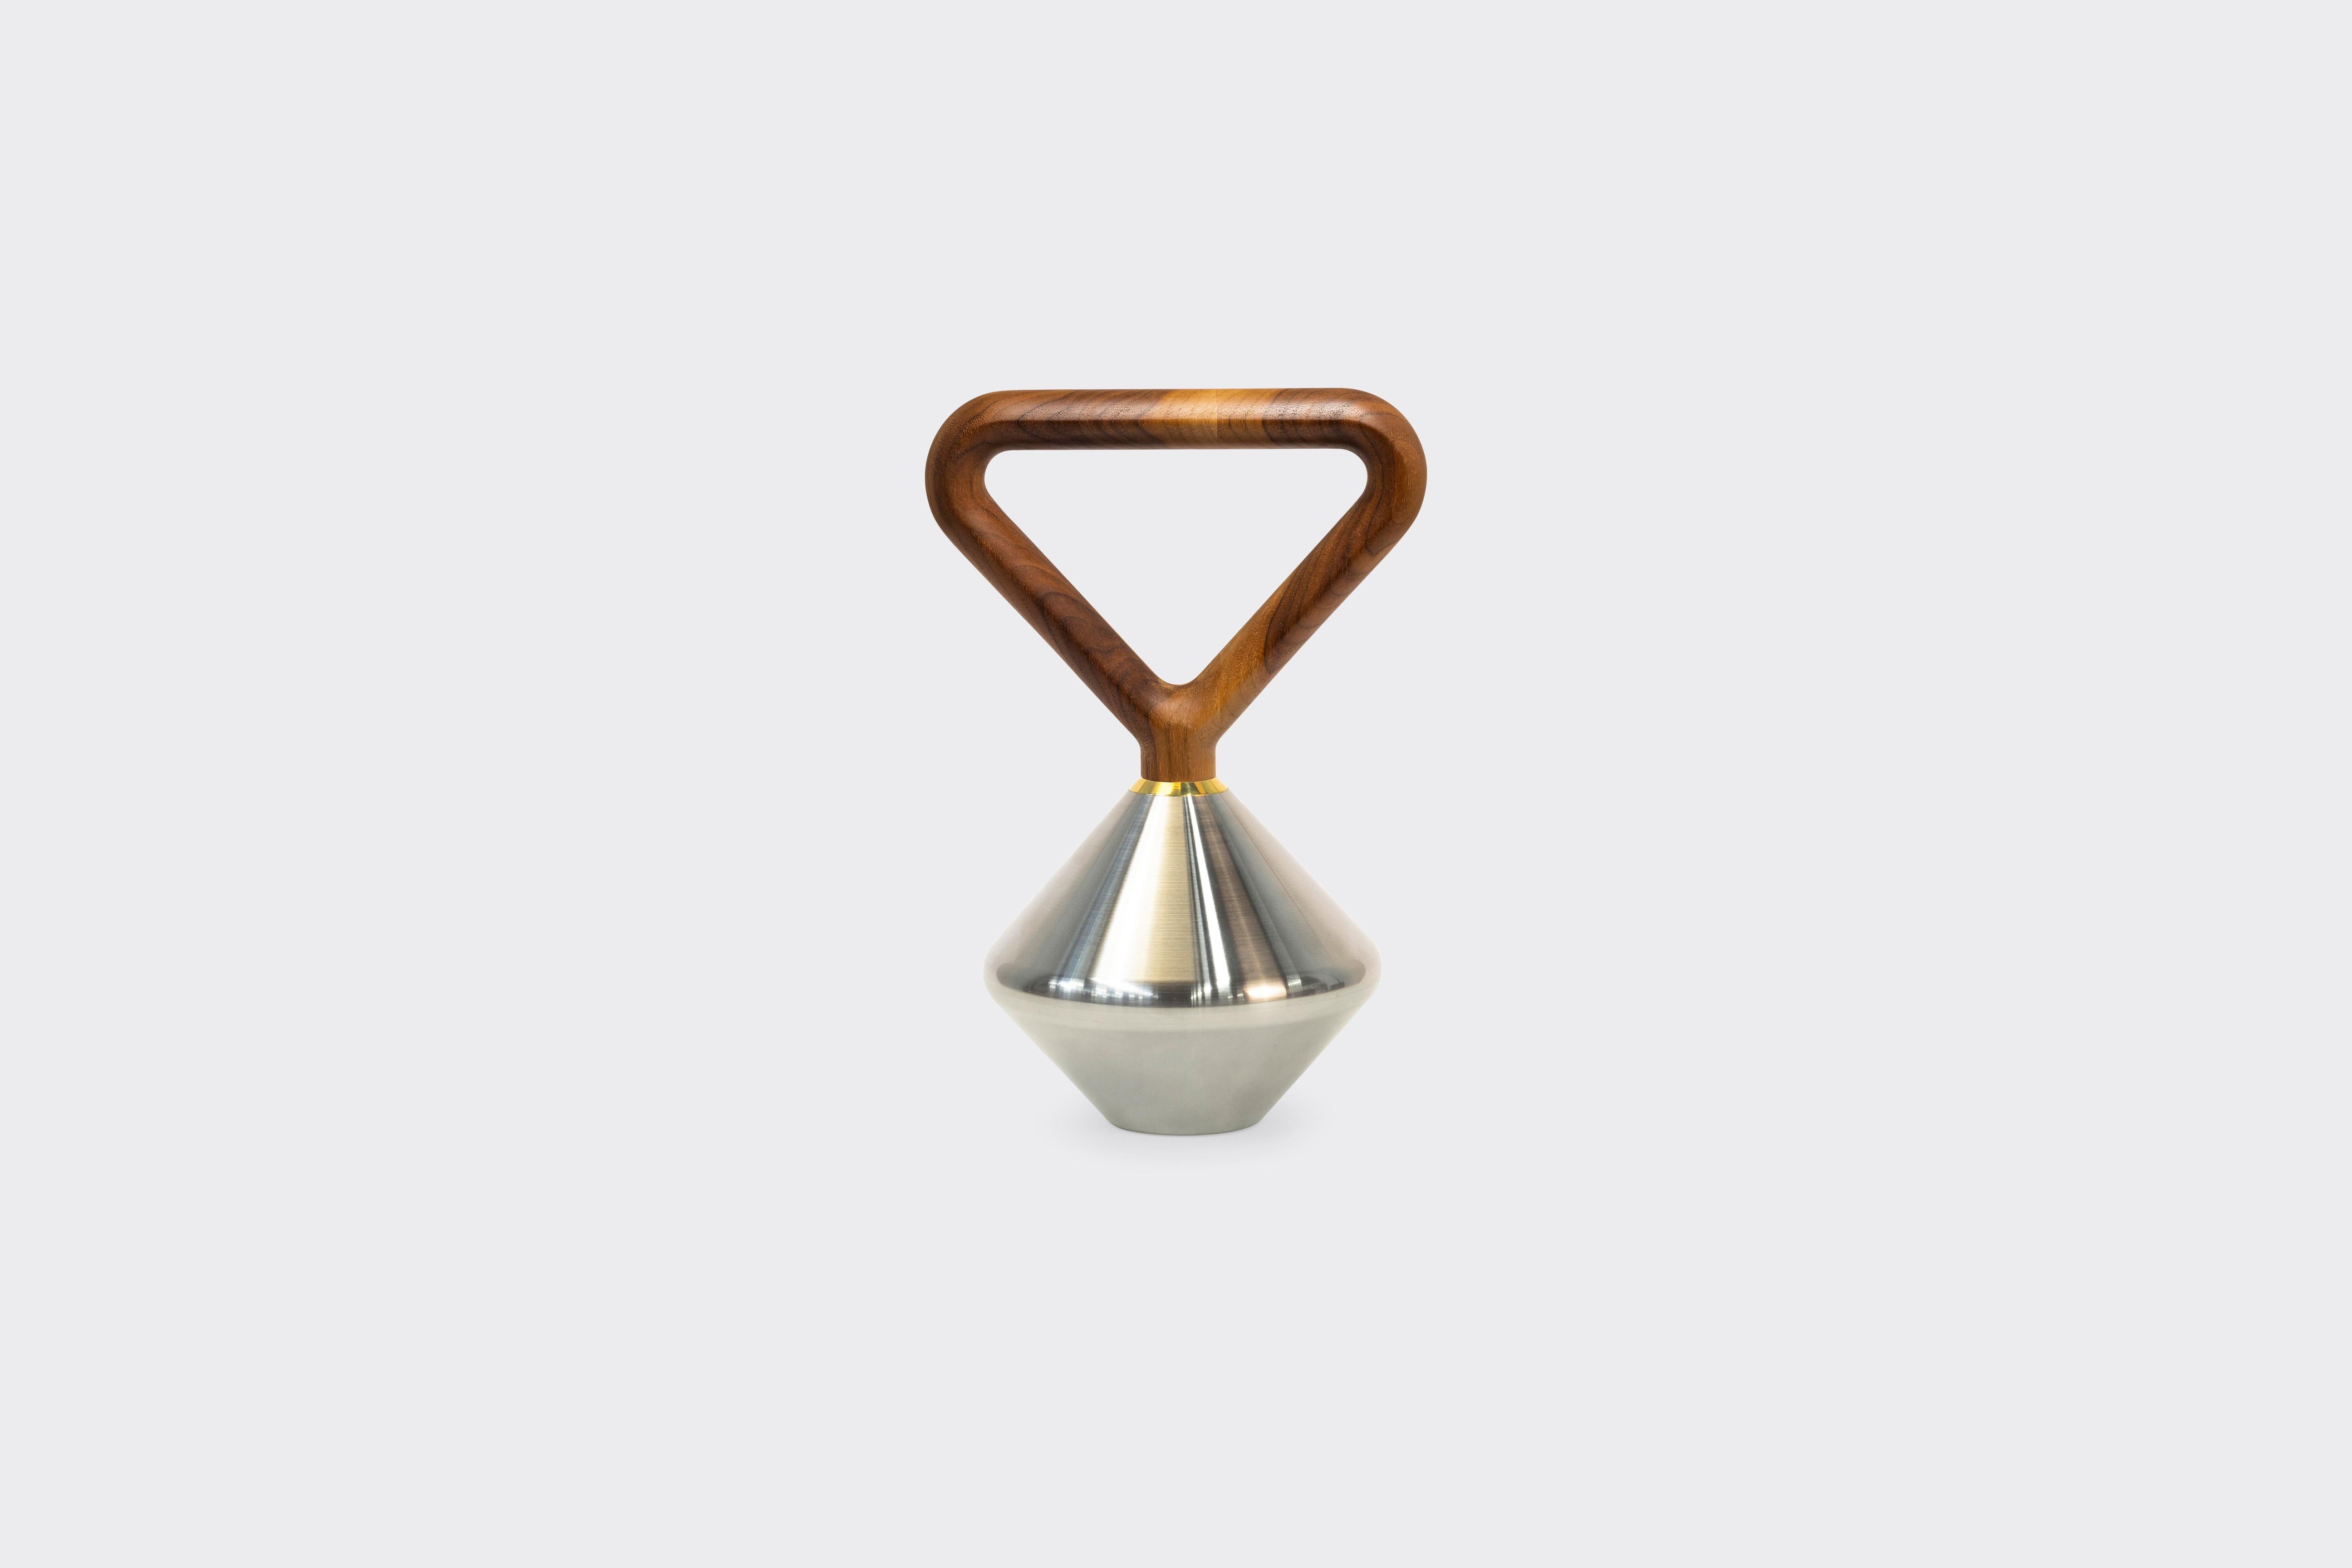 Kettlebell series in walnut.
Perfectly shaped stainless steel, noble solid wood and fine brass details, this kettlebell is an absolute eye-catcher. The handle is in a league of its own: It is milled from solid wood in a complex process where a new